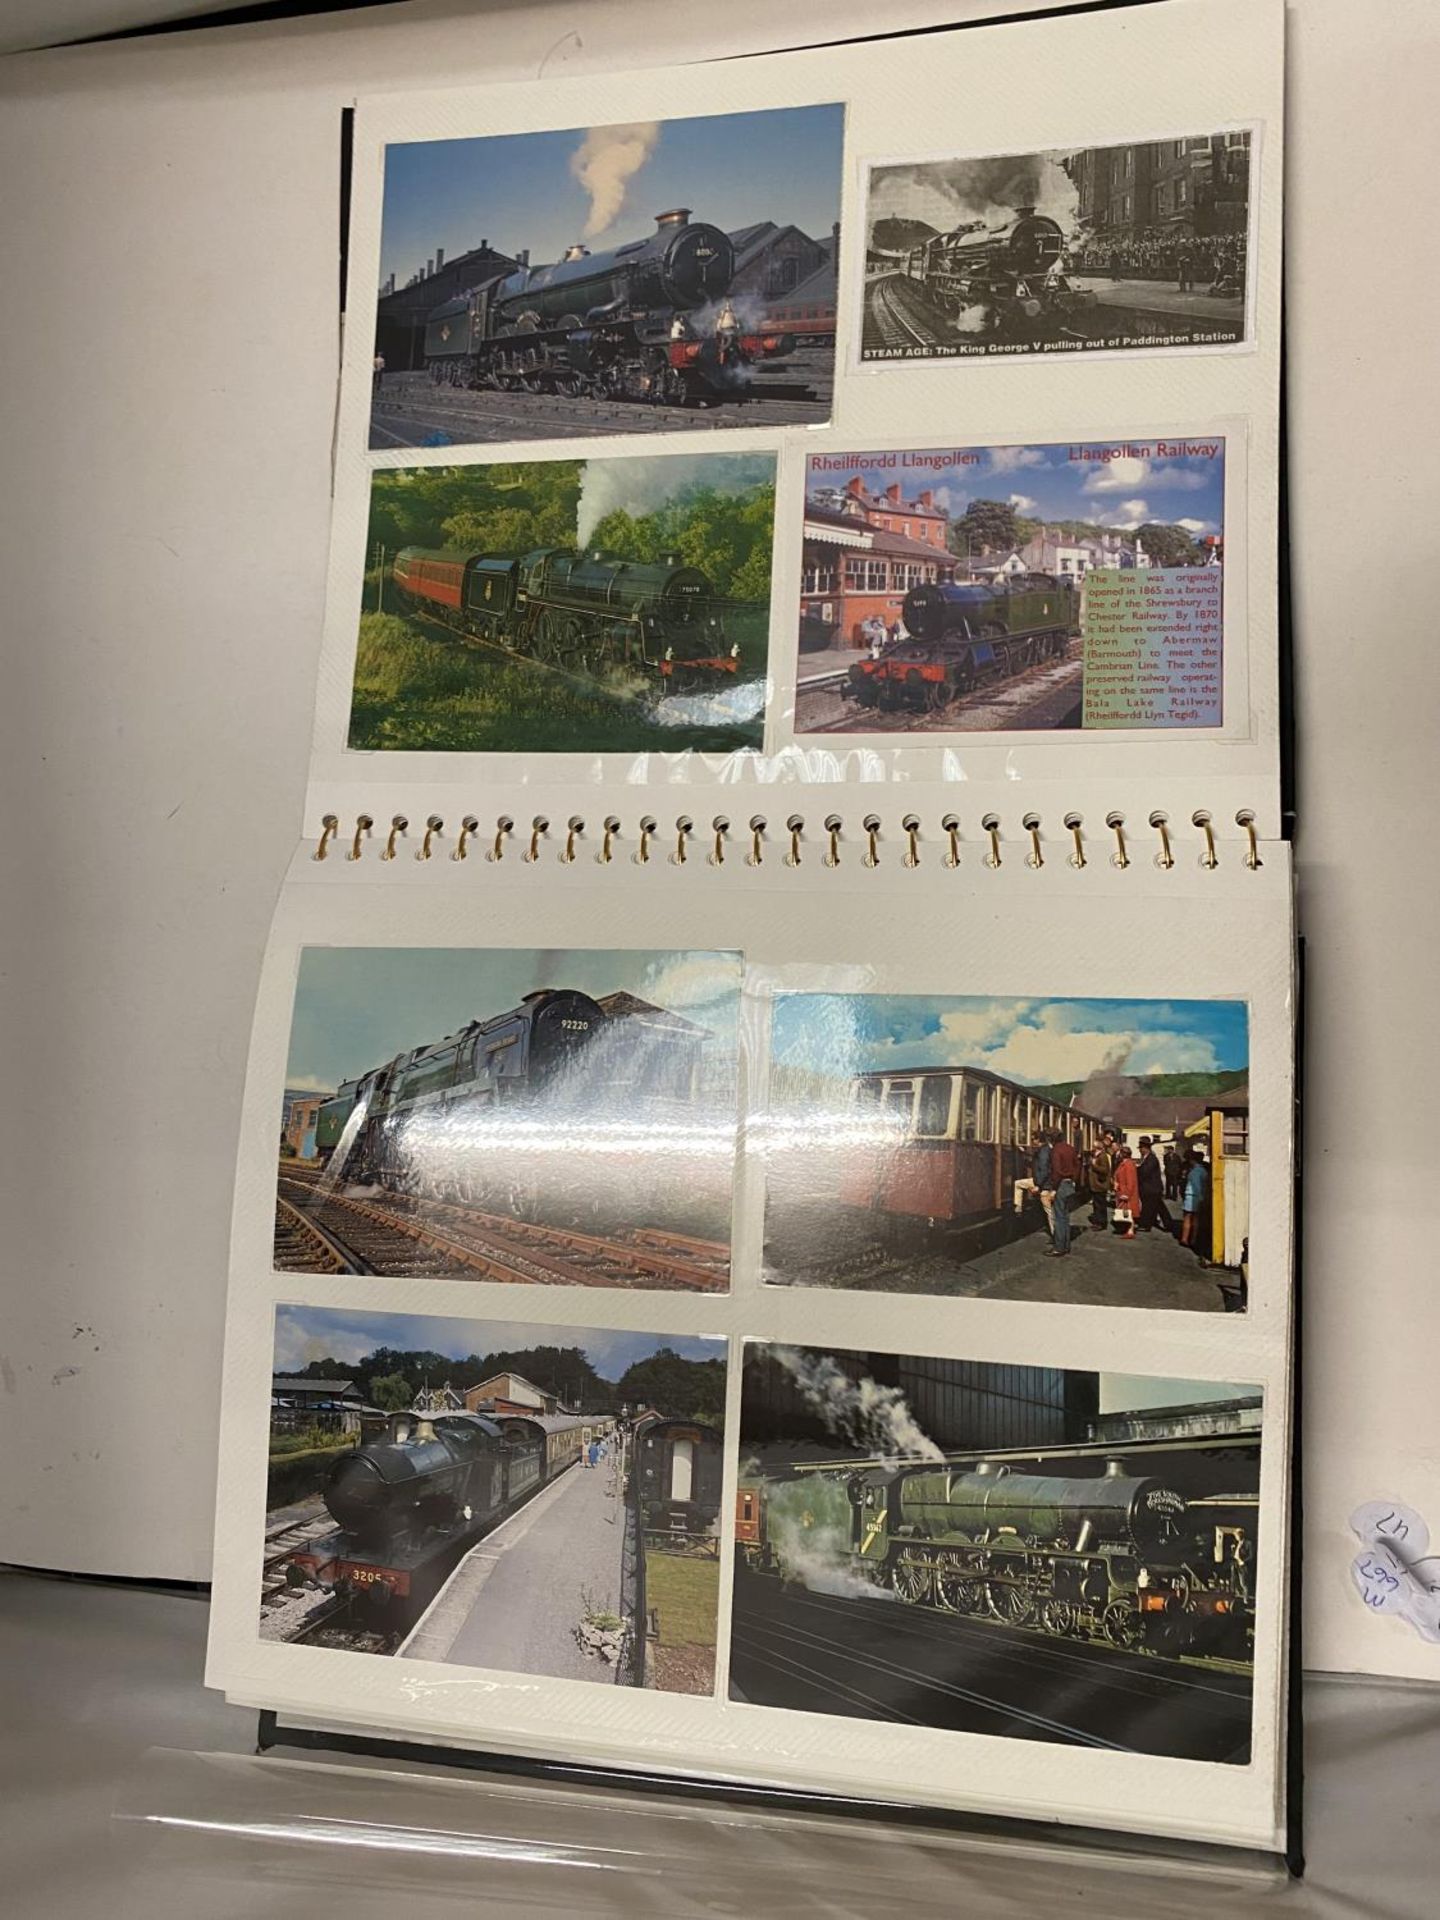 A LARGE PHOTORAPH ALBUM OF OF VINTAGE TRAIN POSTCARDS AND PHOTOS - Image 5 of 6